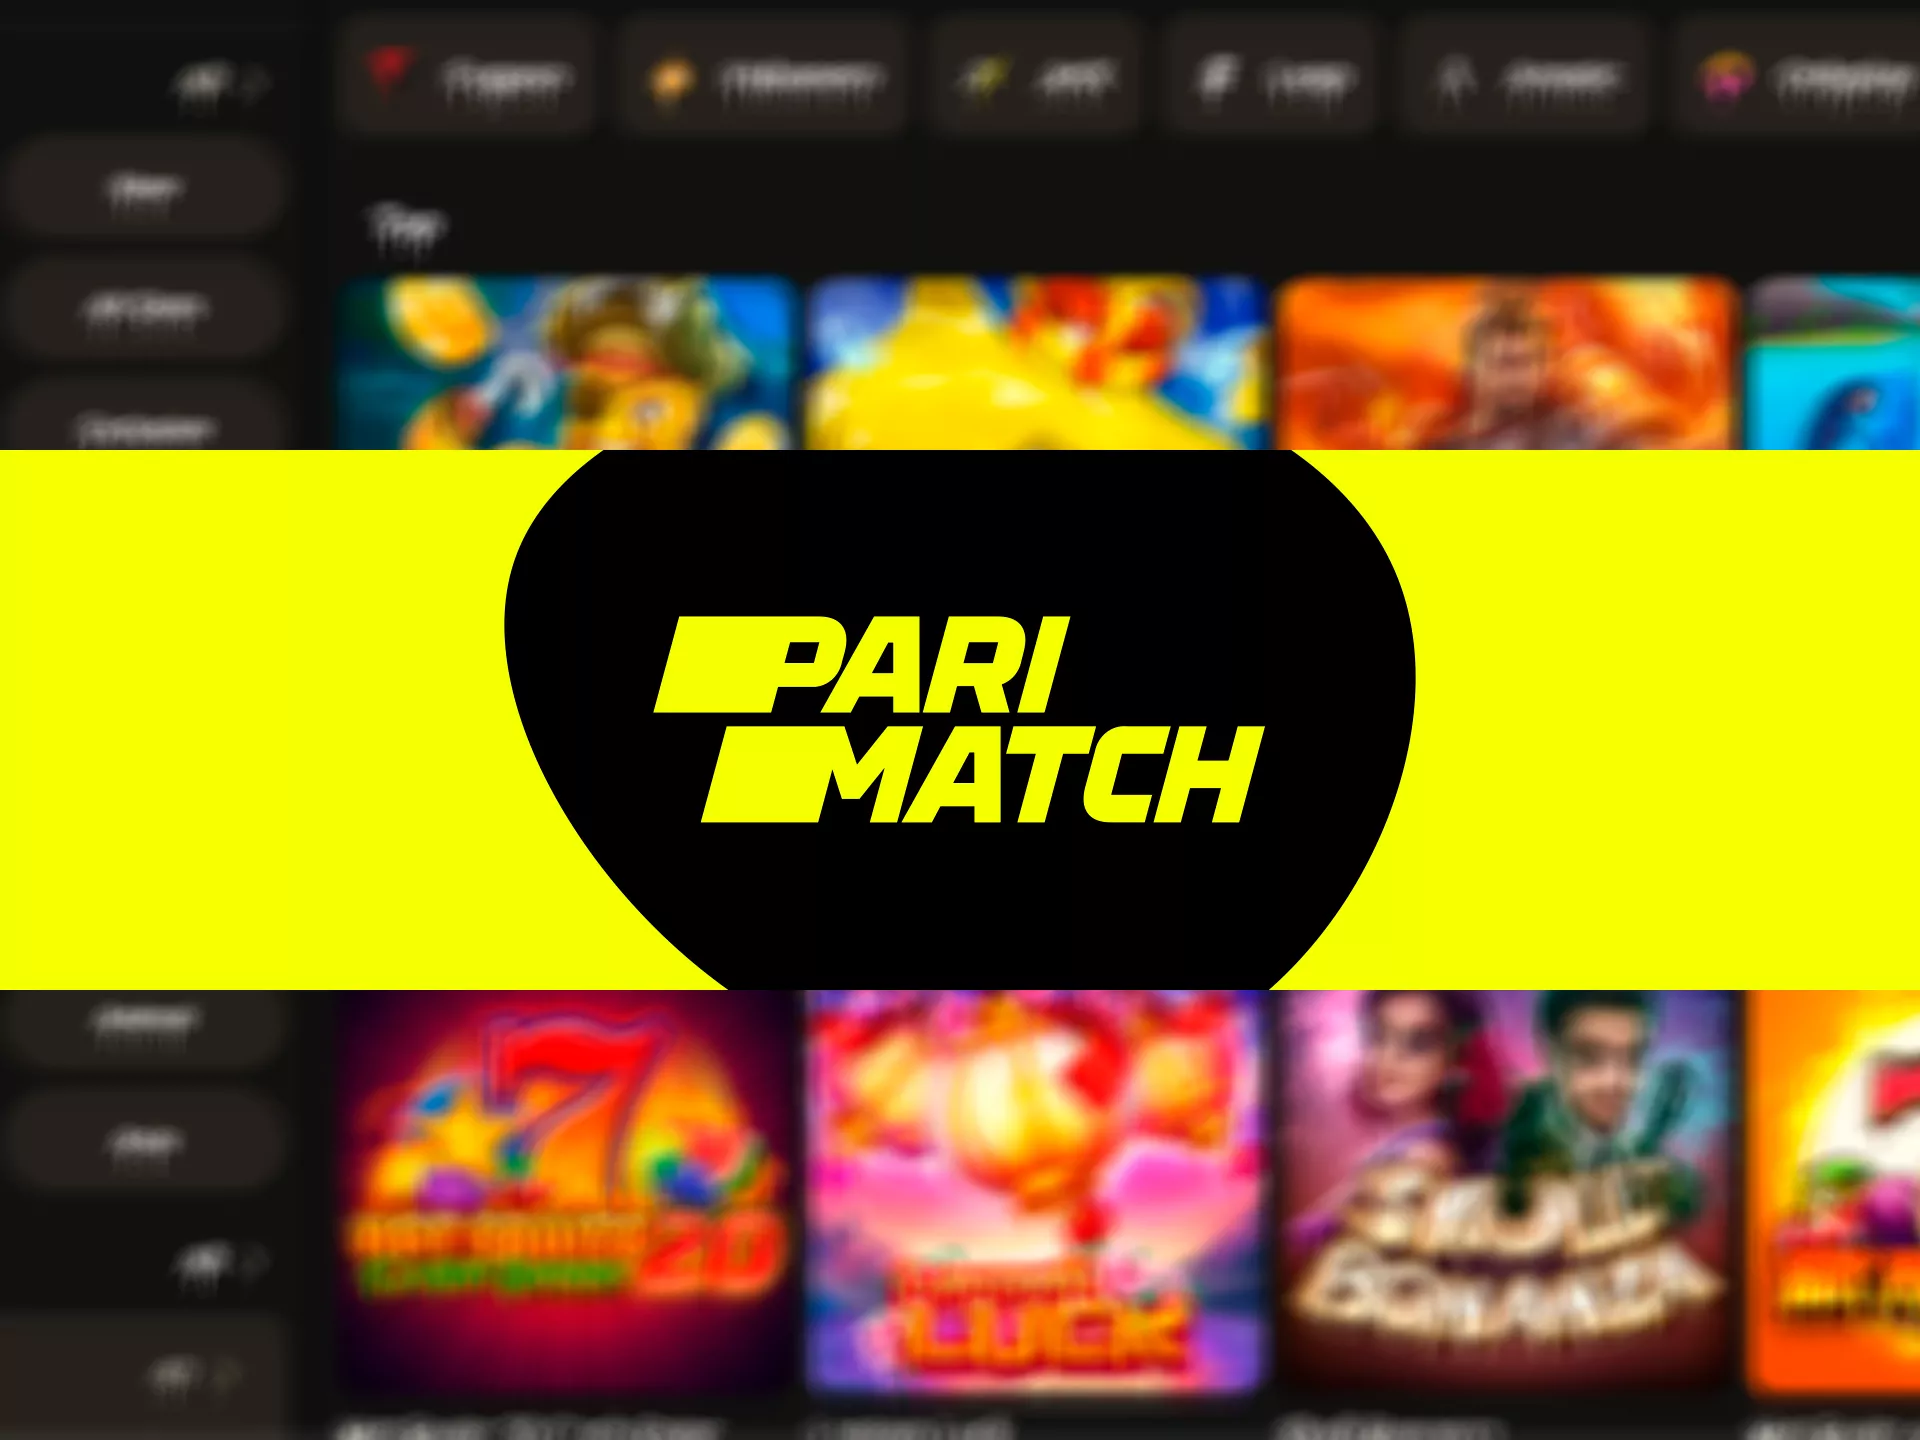 Parimatch is a licensed and fully legal online casino.